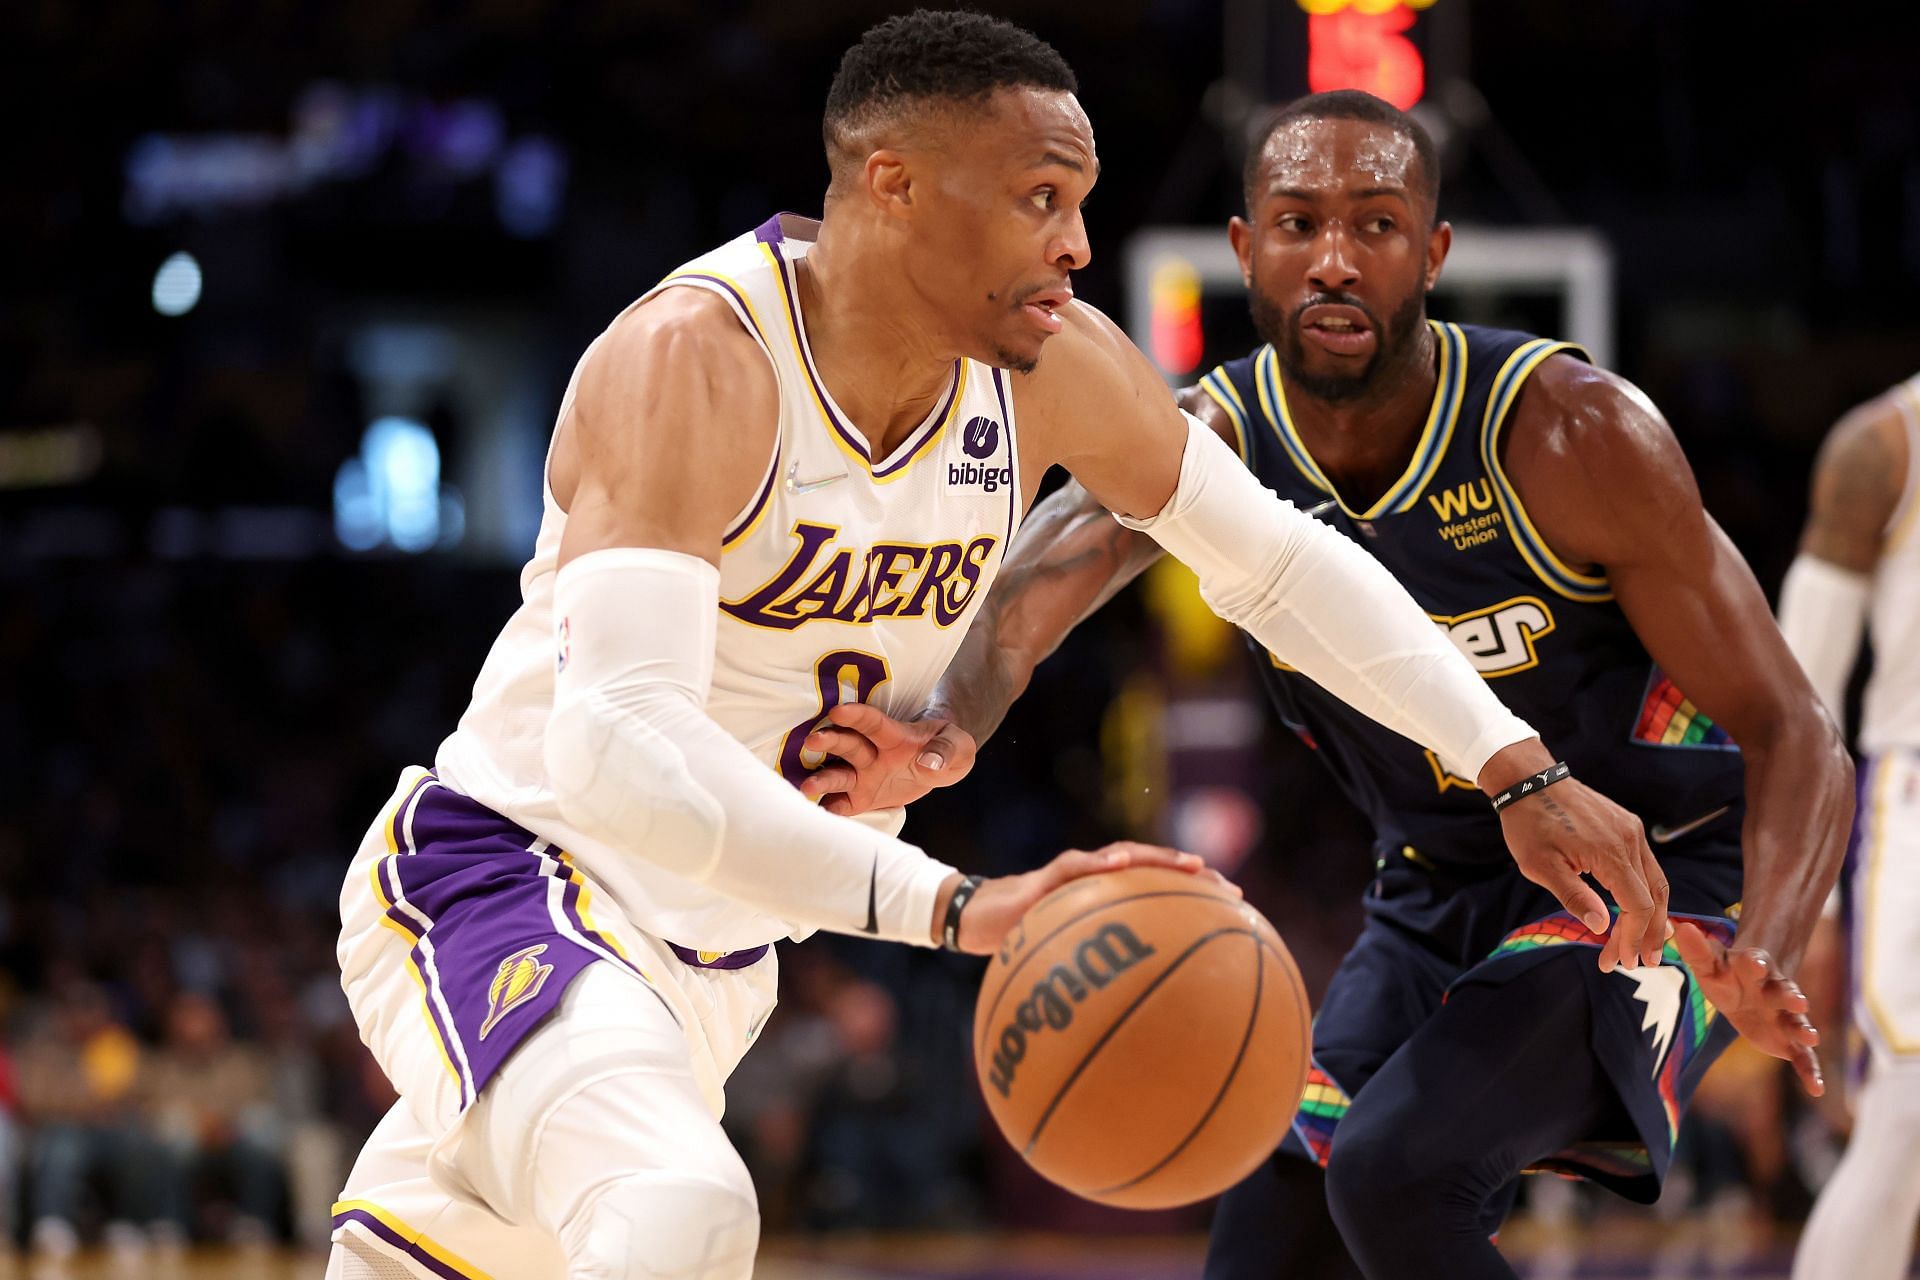 Russell Westbrook of the Los Angeles Lakers dribbles past the defense of Davon Reed.